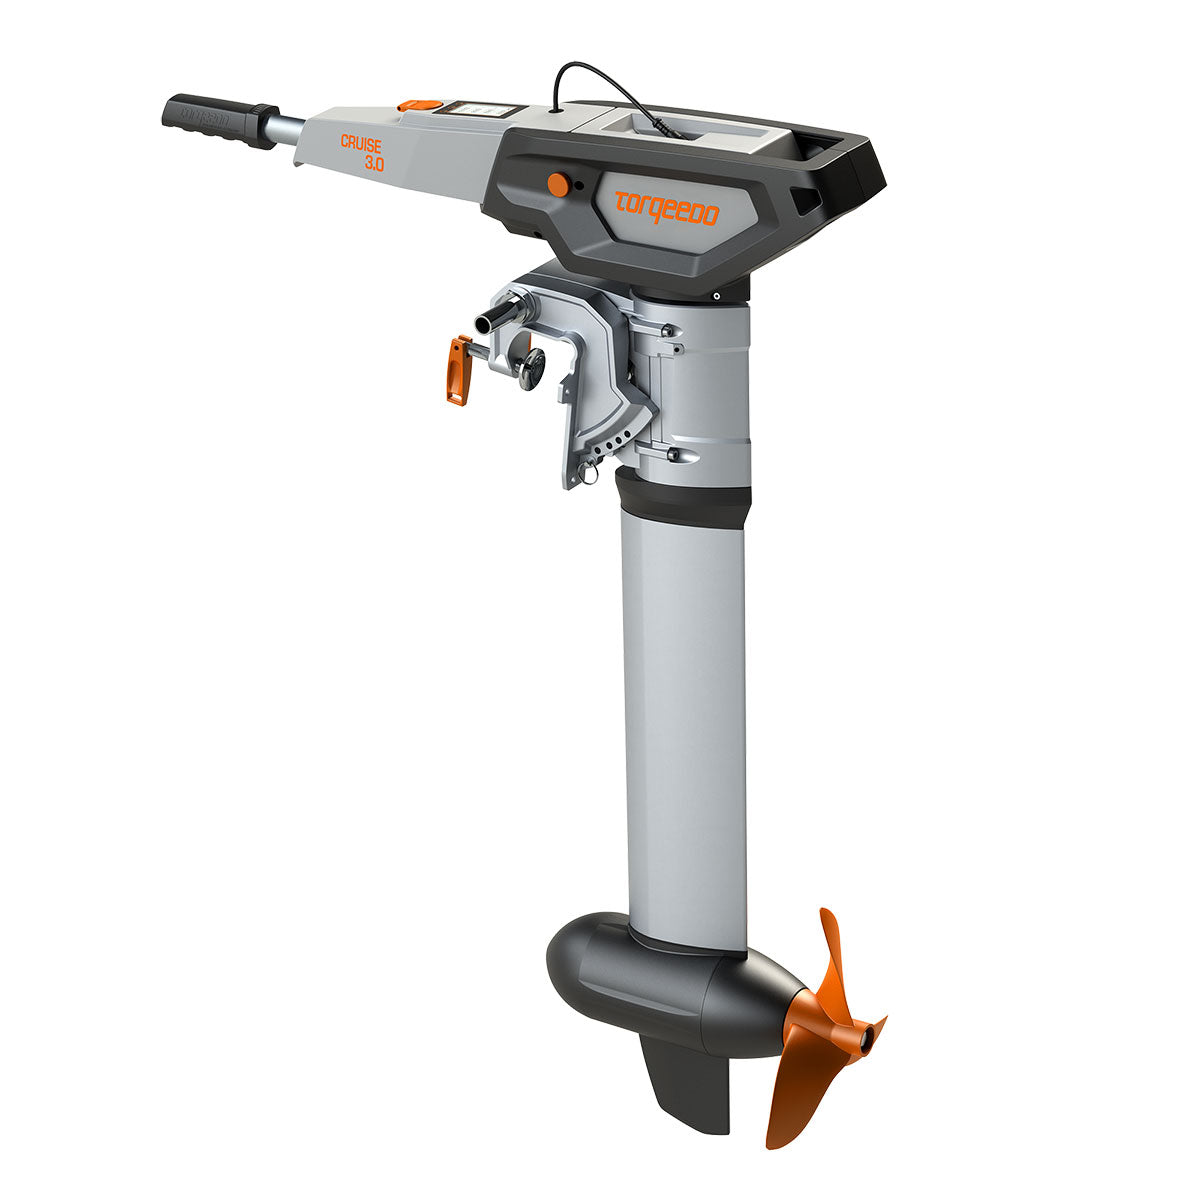 Torqeedo Cruise 3.0 T Electric outboard for motorboats and sailboats up to 3 tons